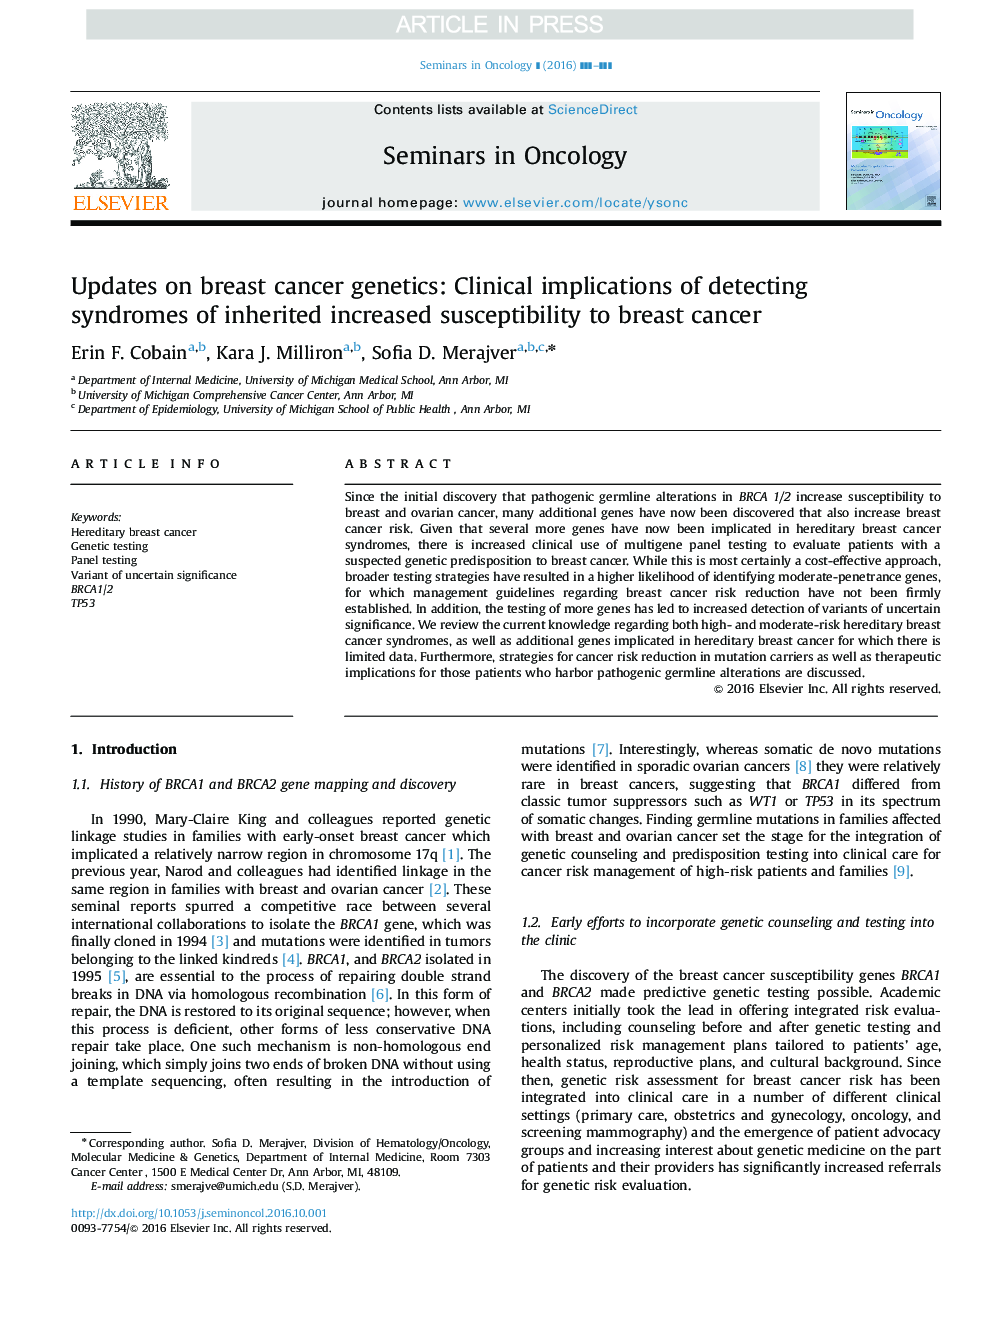 Updates on breast cancer genetics: Clinical implications of detecting syndromes of inherited increased susceptibility to breast cancer